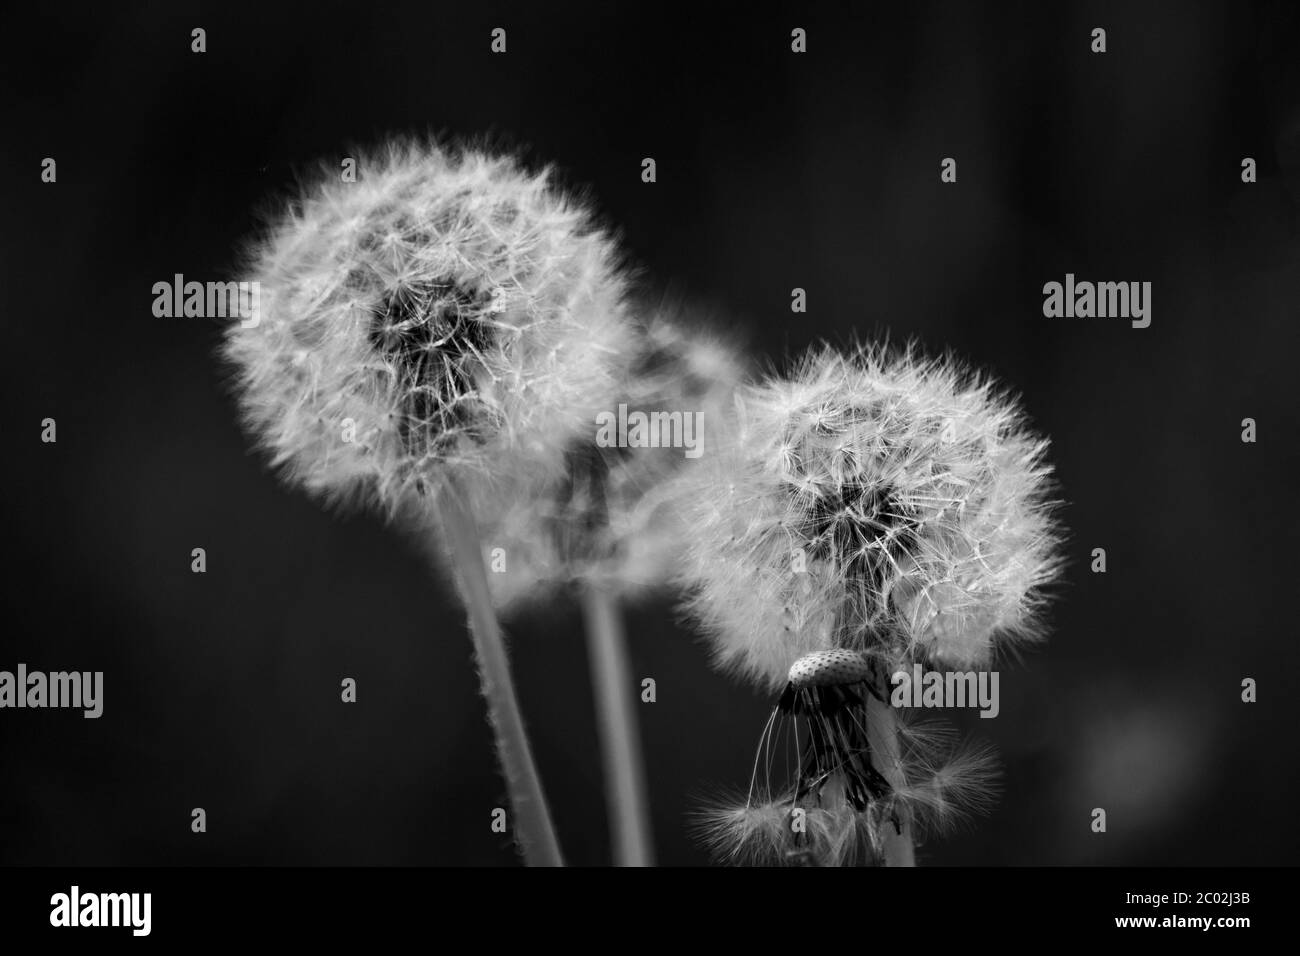 Dandelion field Black and White Stock Photos & Images - Alamy